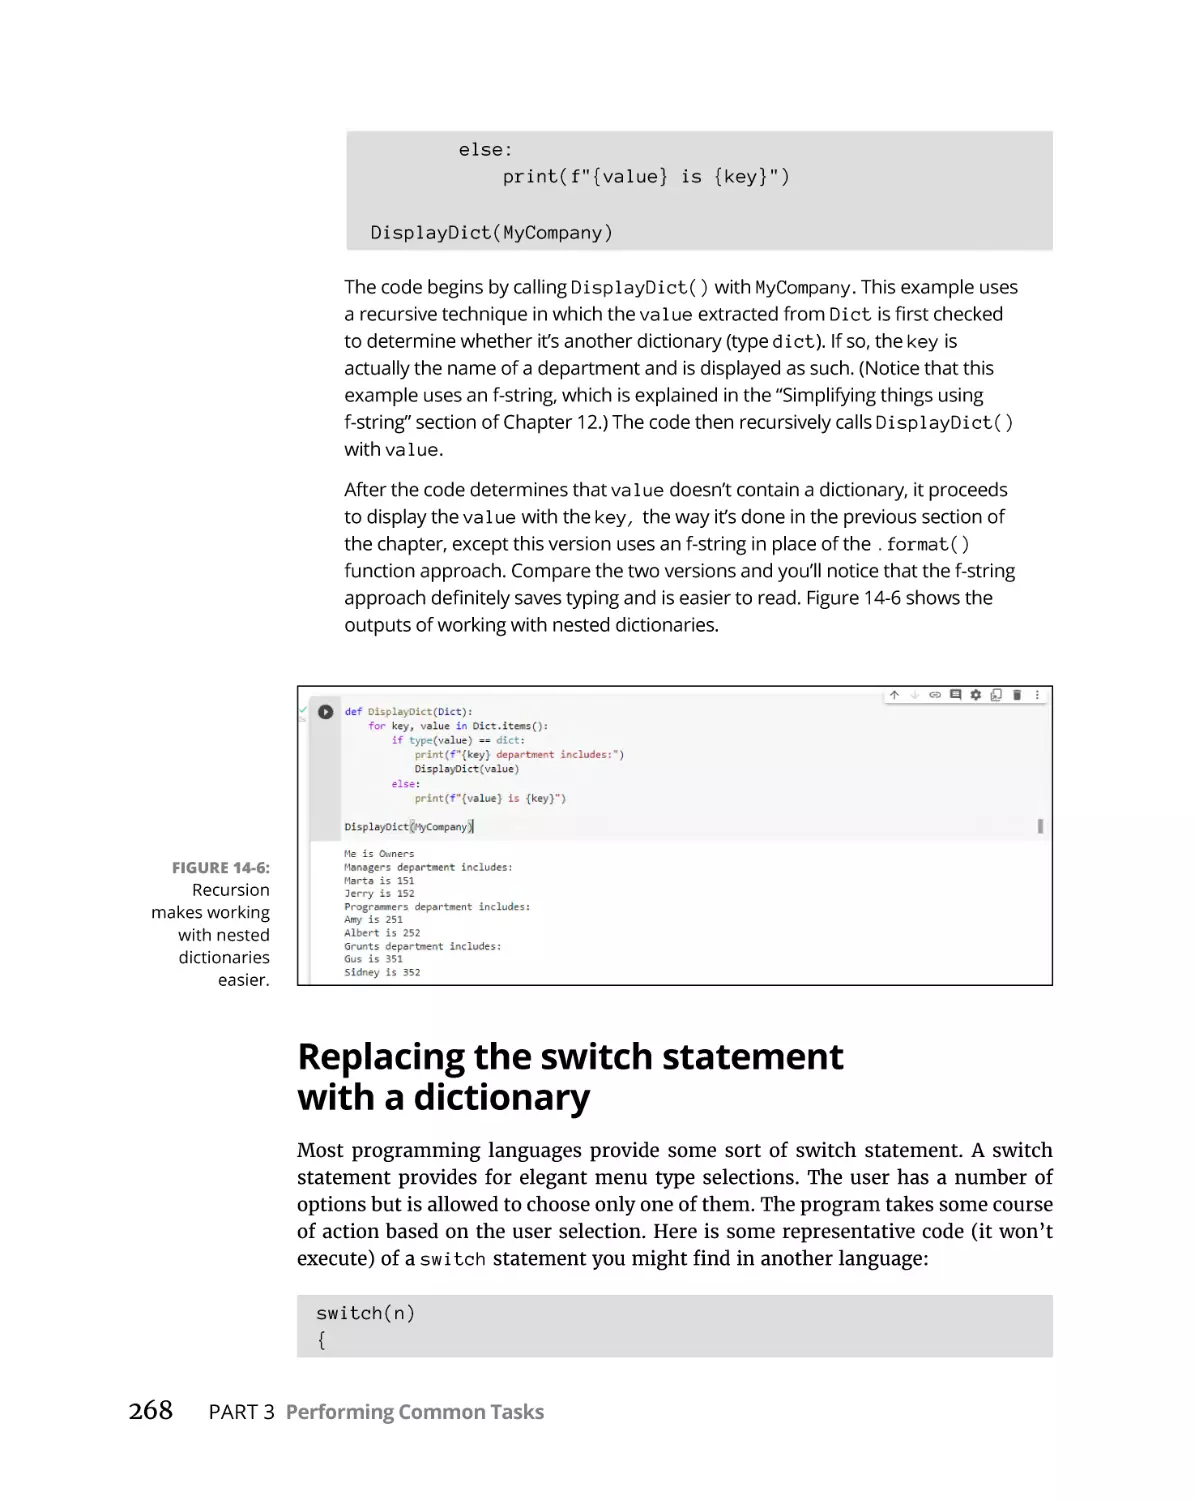 Replacing the switch statement with a dictionary